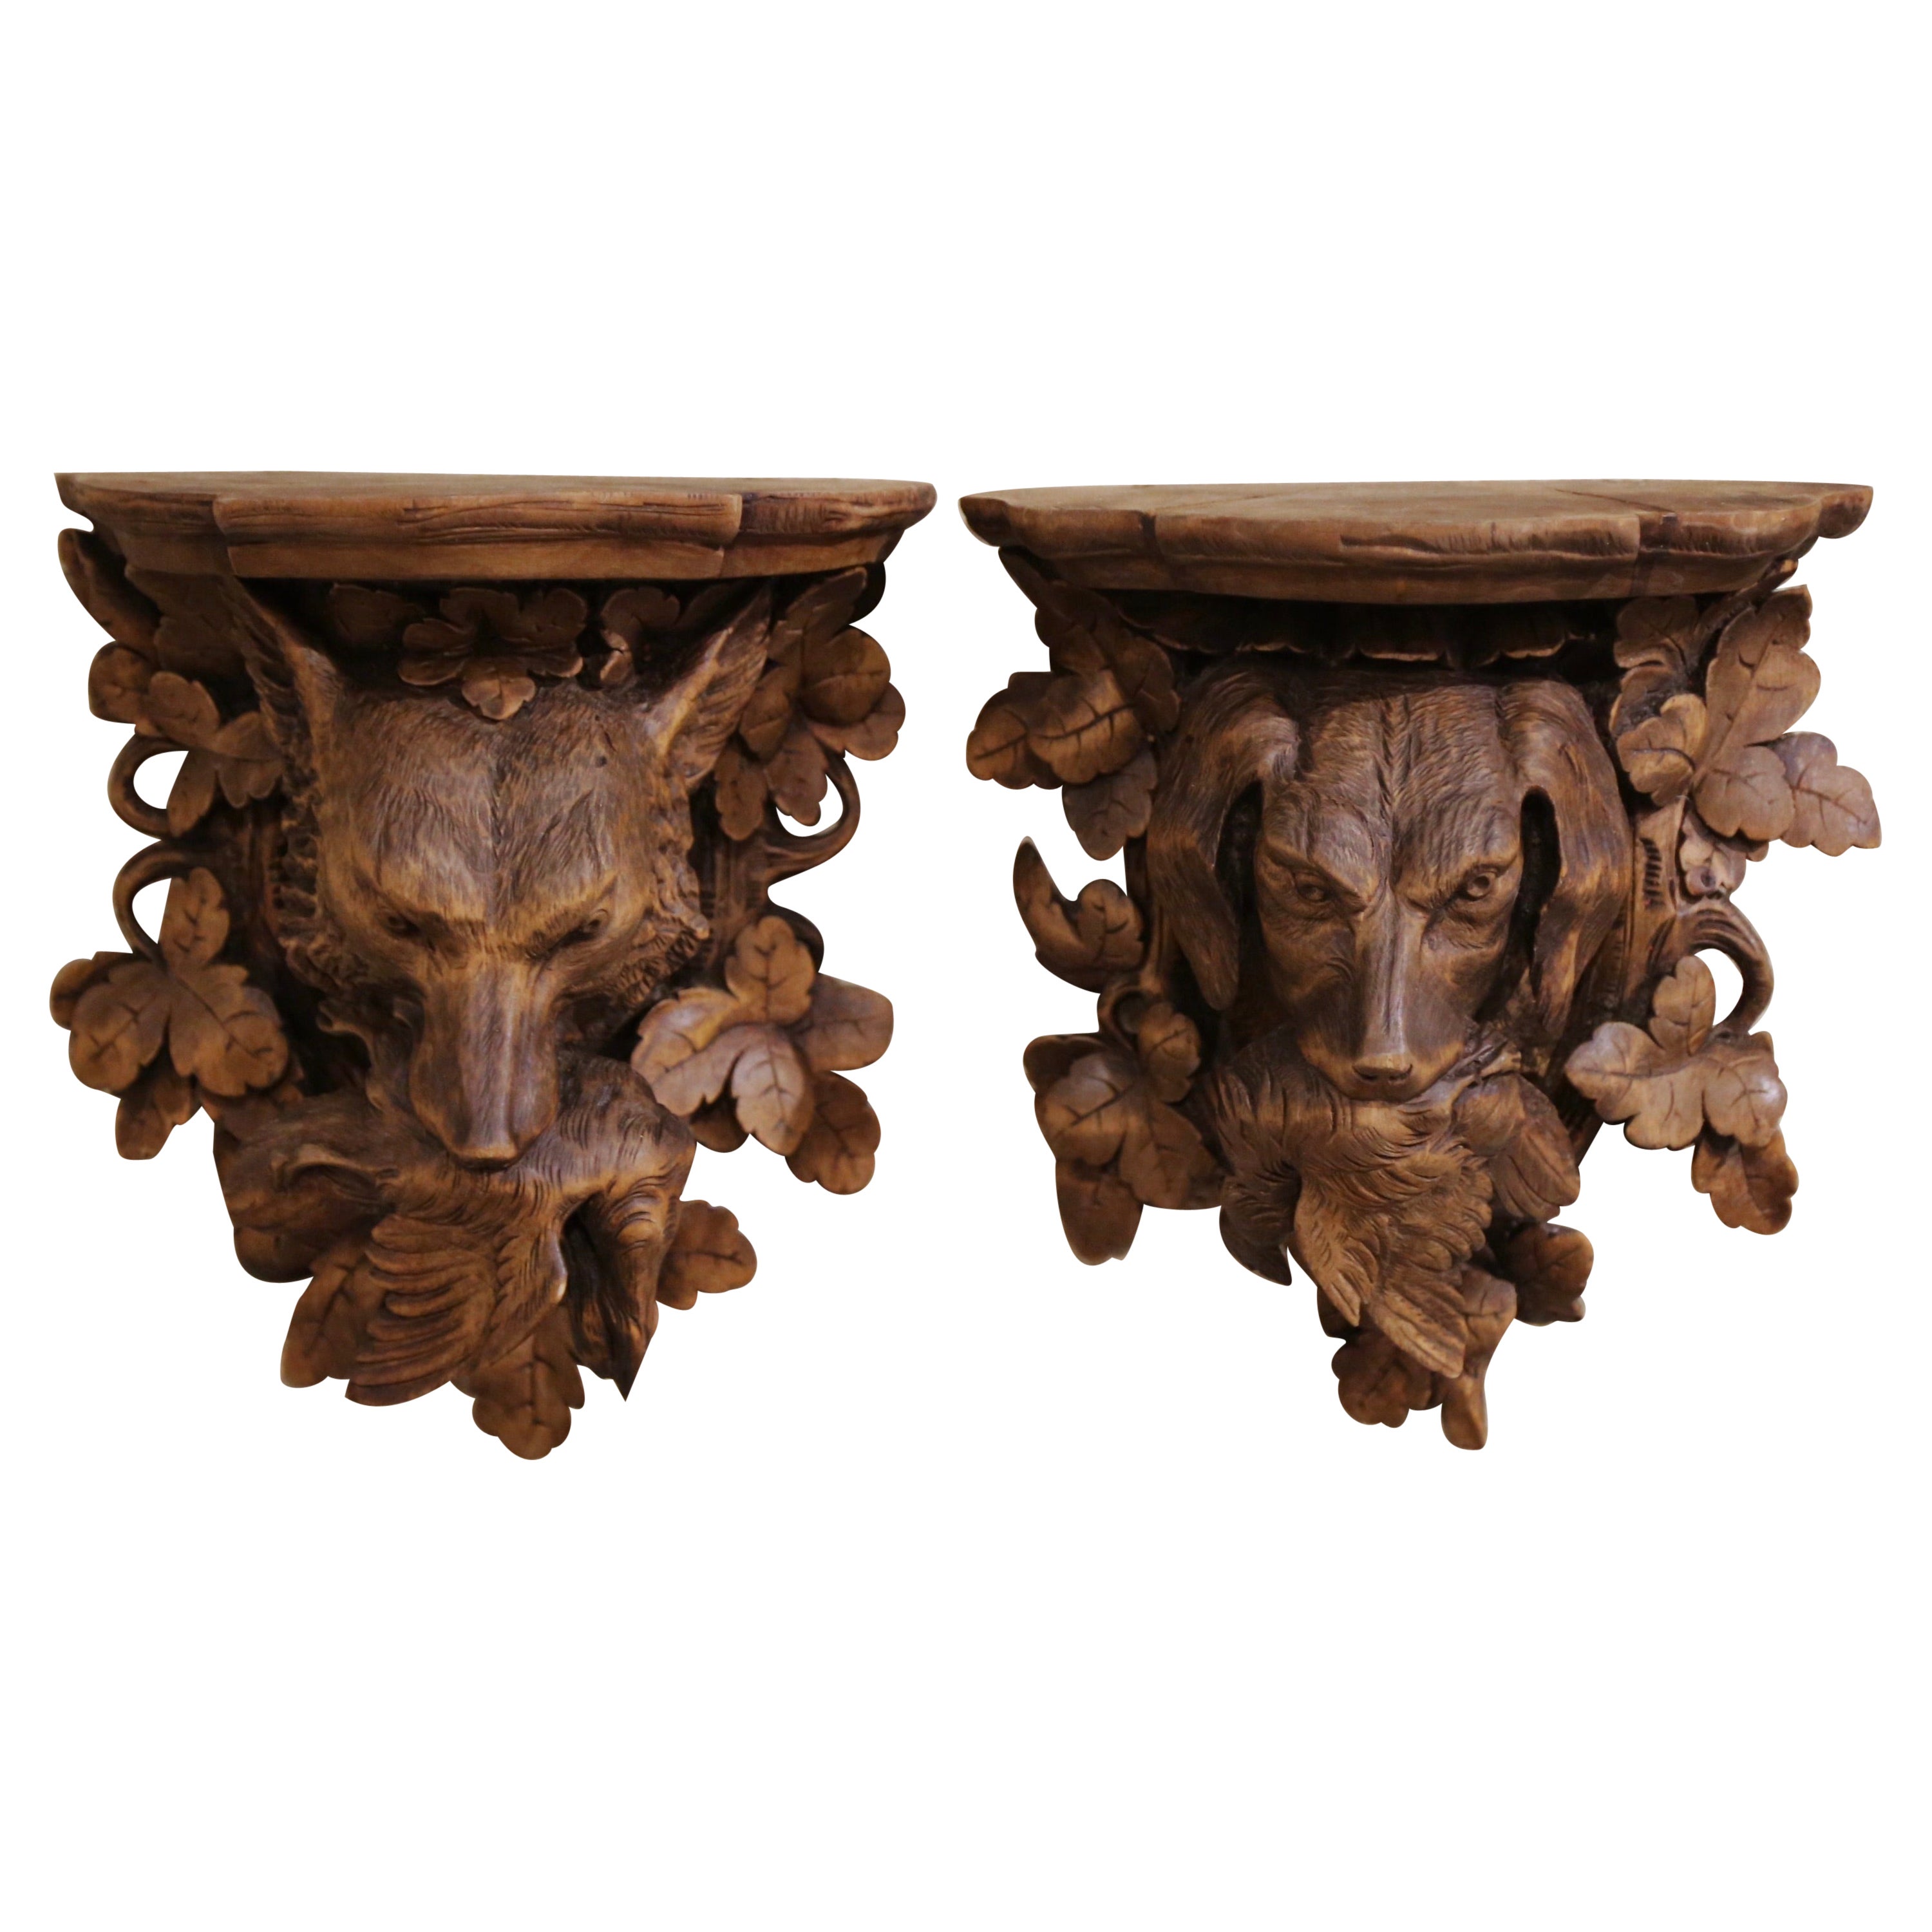 Pair of 19th Century French Black Forest Carved Walnut Hanging Shelves with Dog